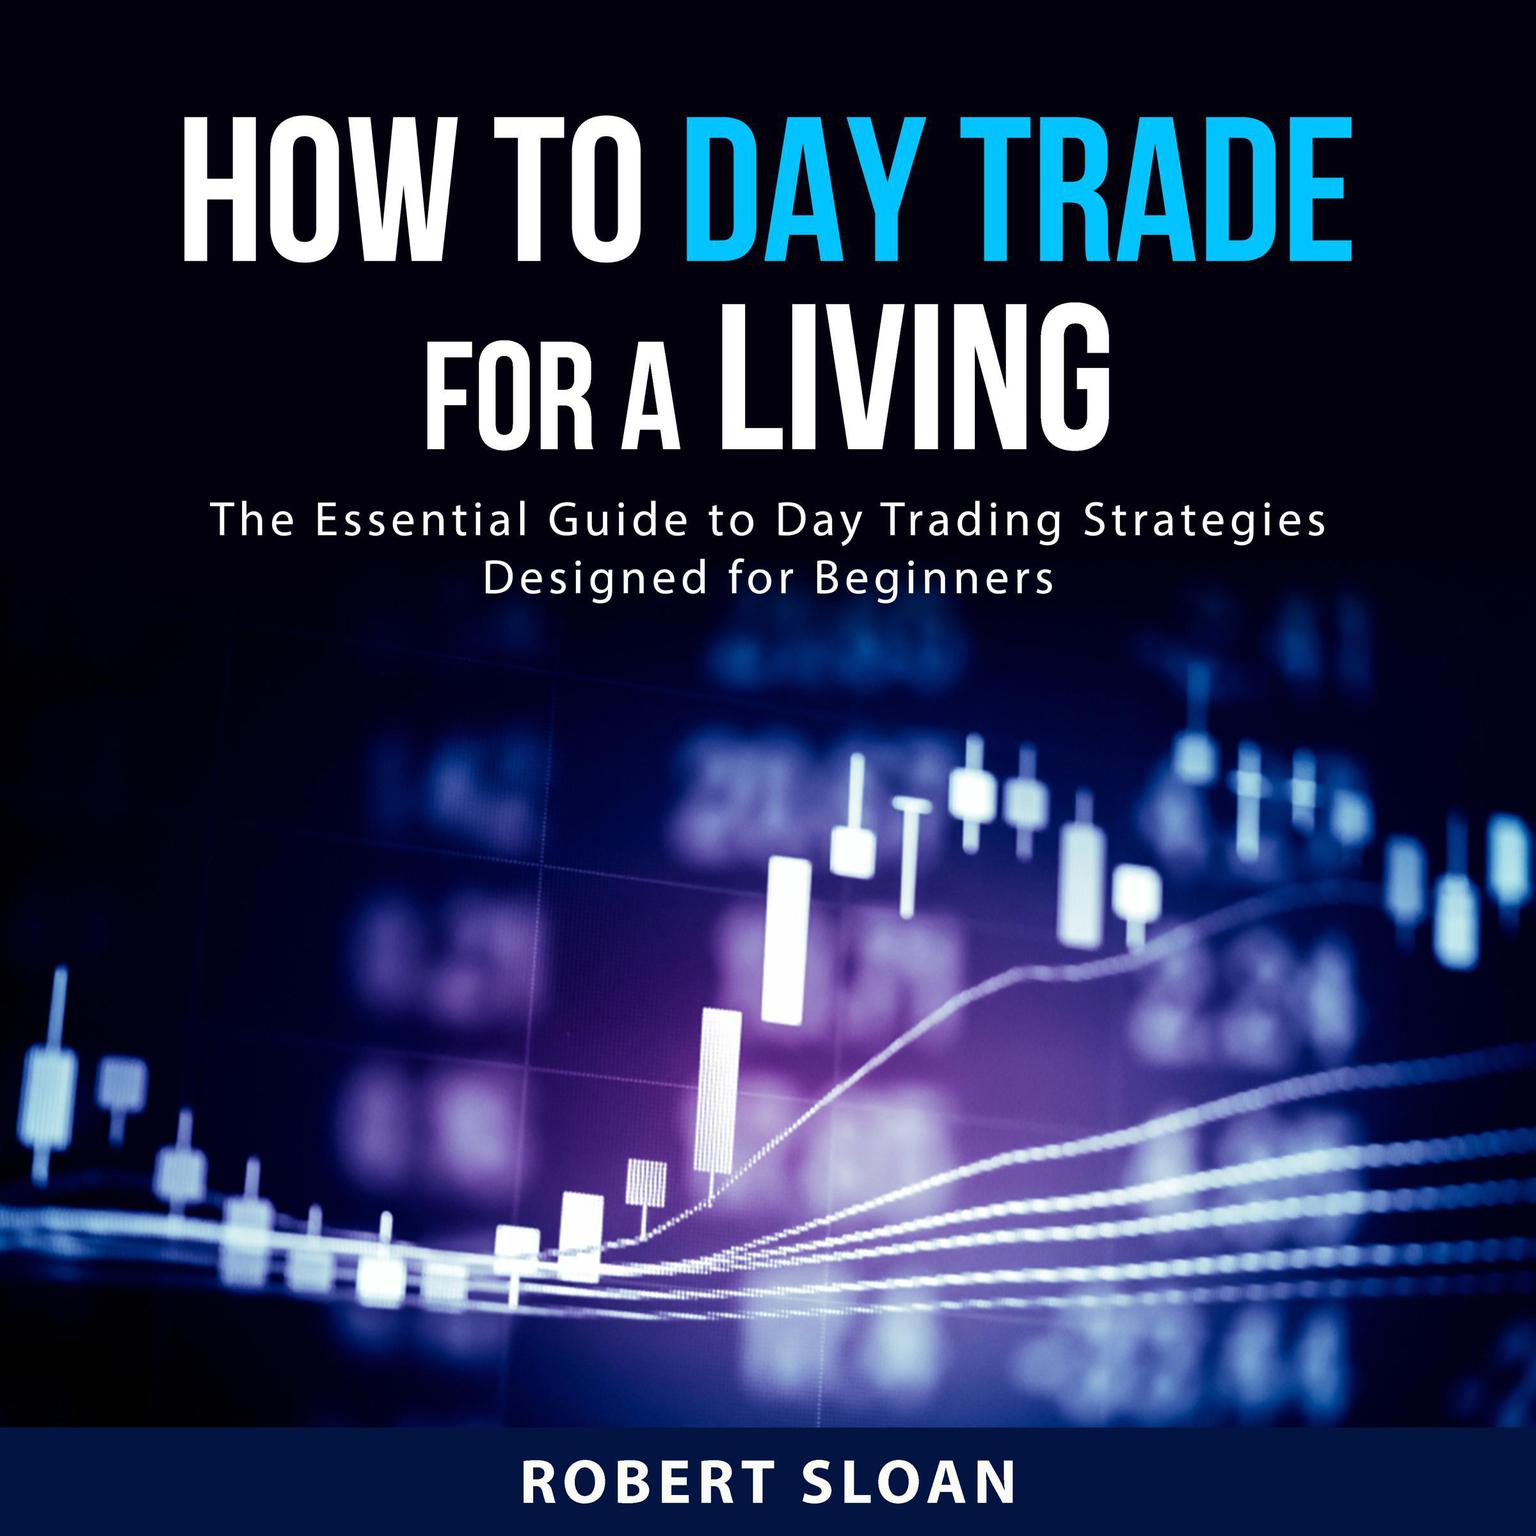 How to Day Trade for a Living Audiobook, by Robert Sloan